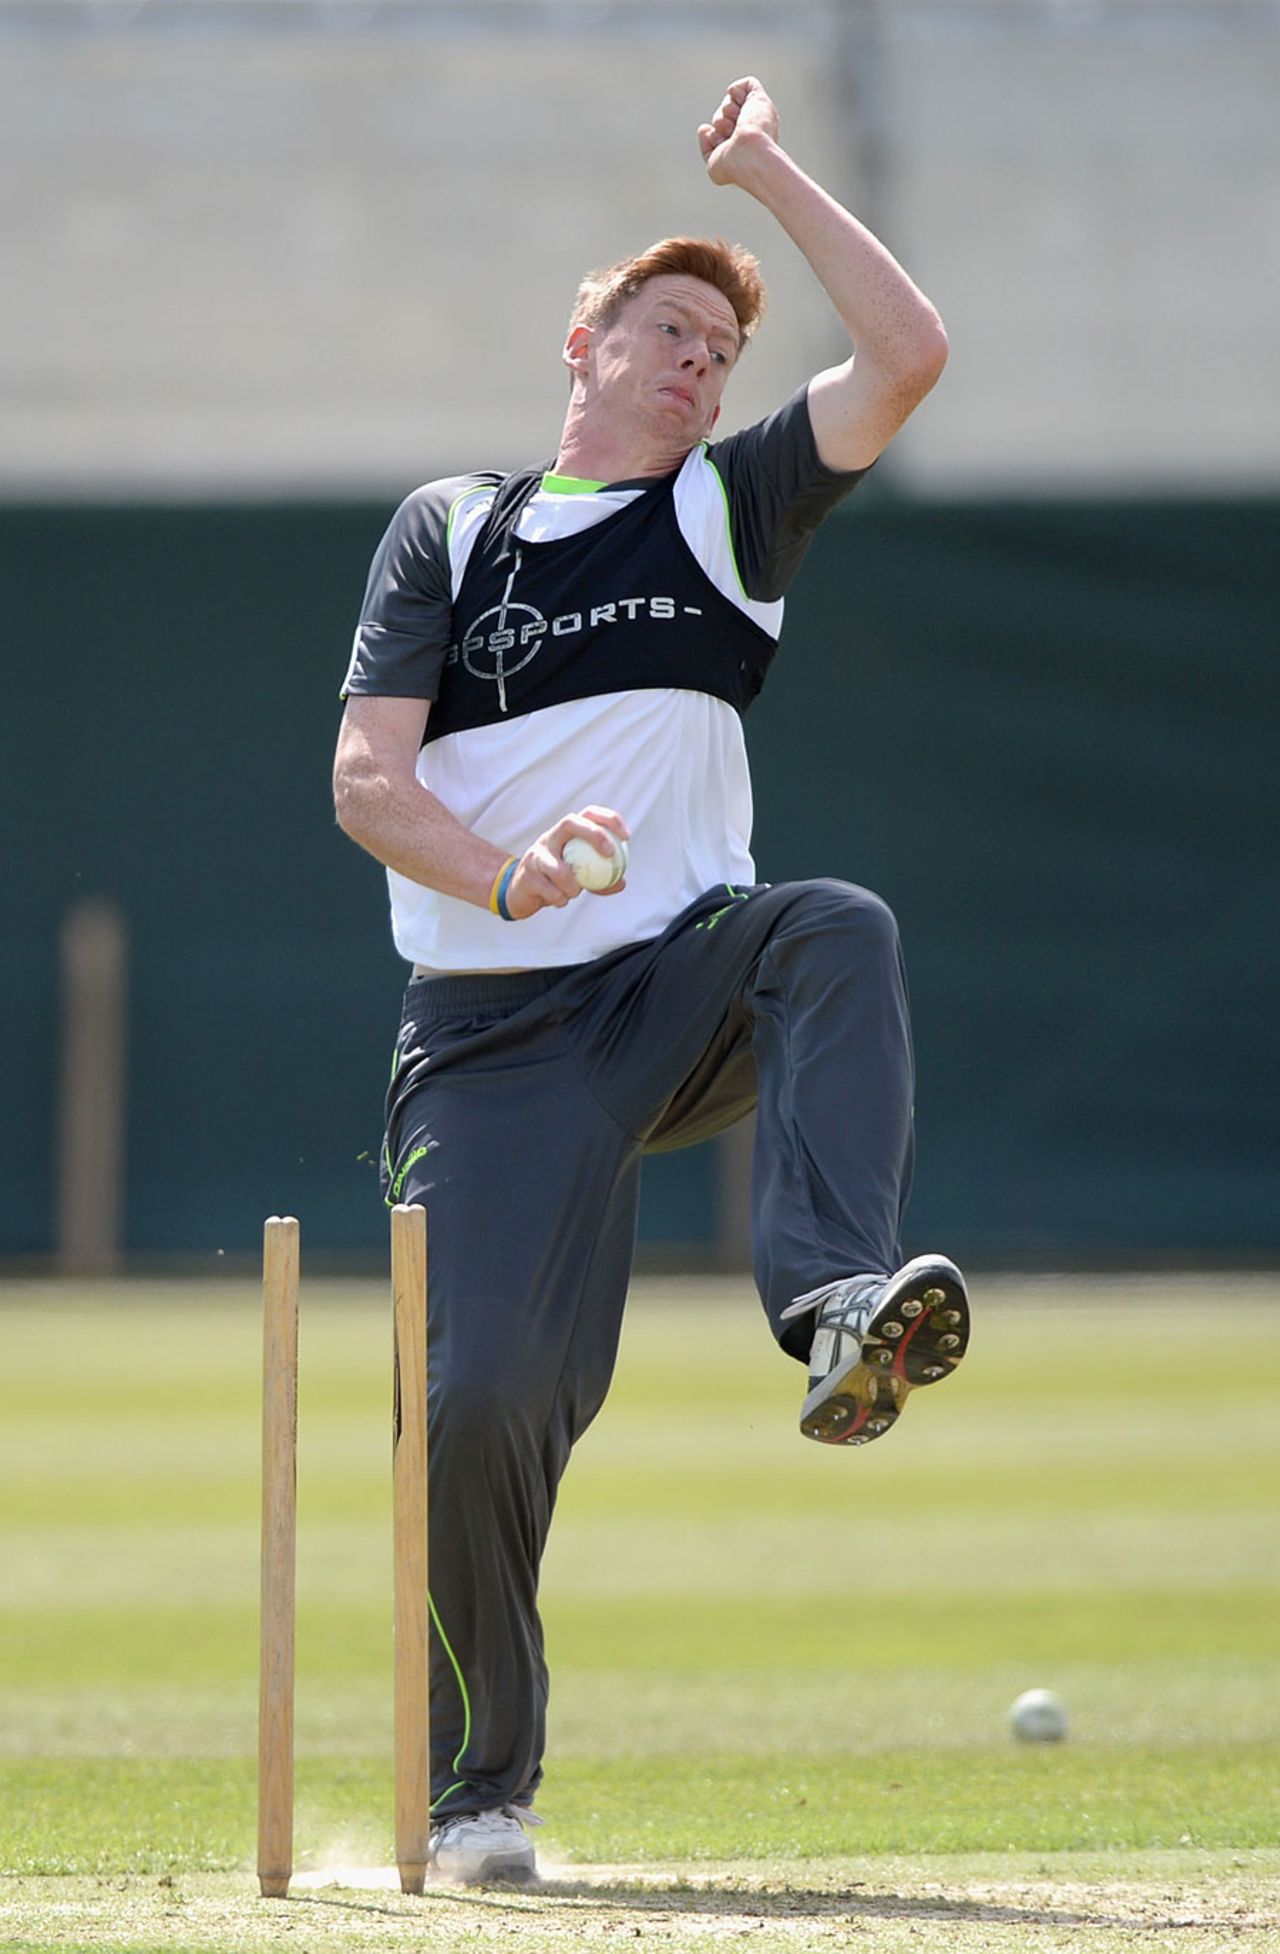 Craig Young will hope to add to some bite to Ireland's pace attack, Malahide, May 7, 2015